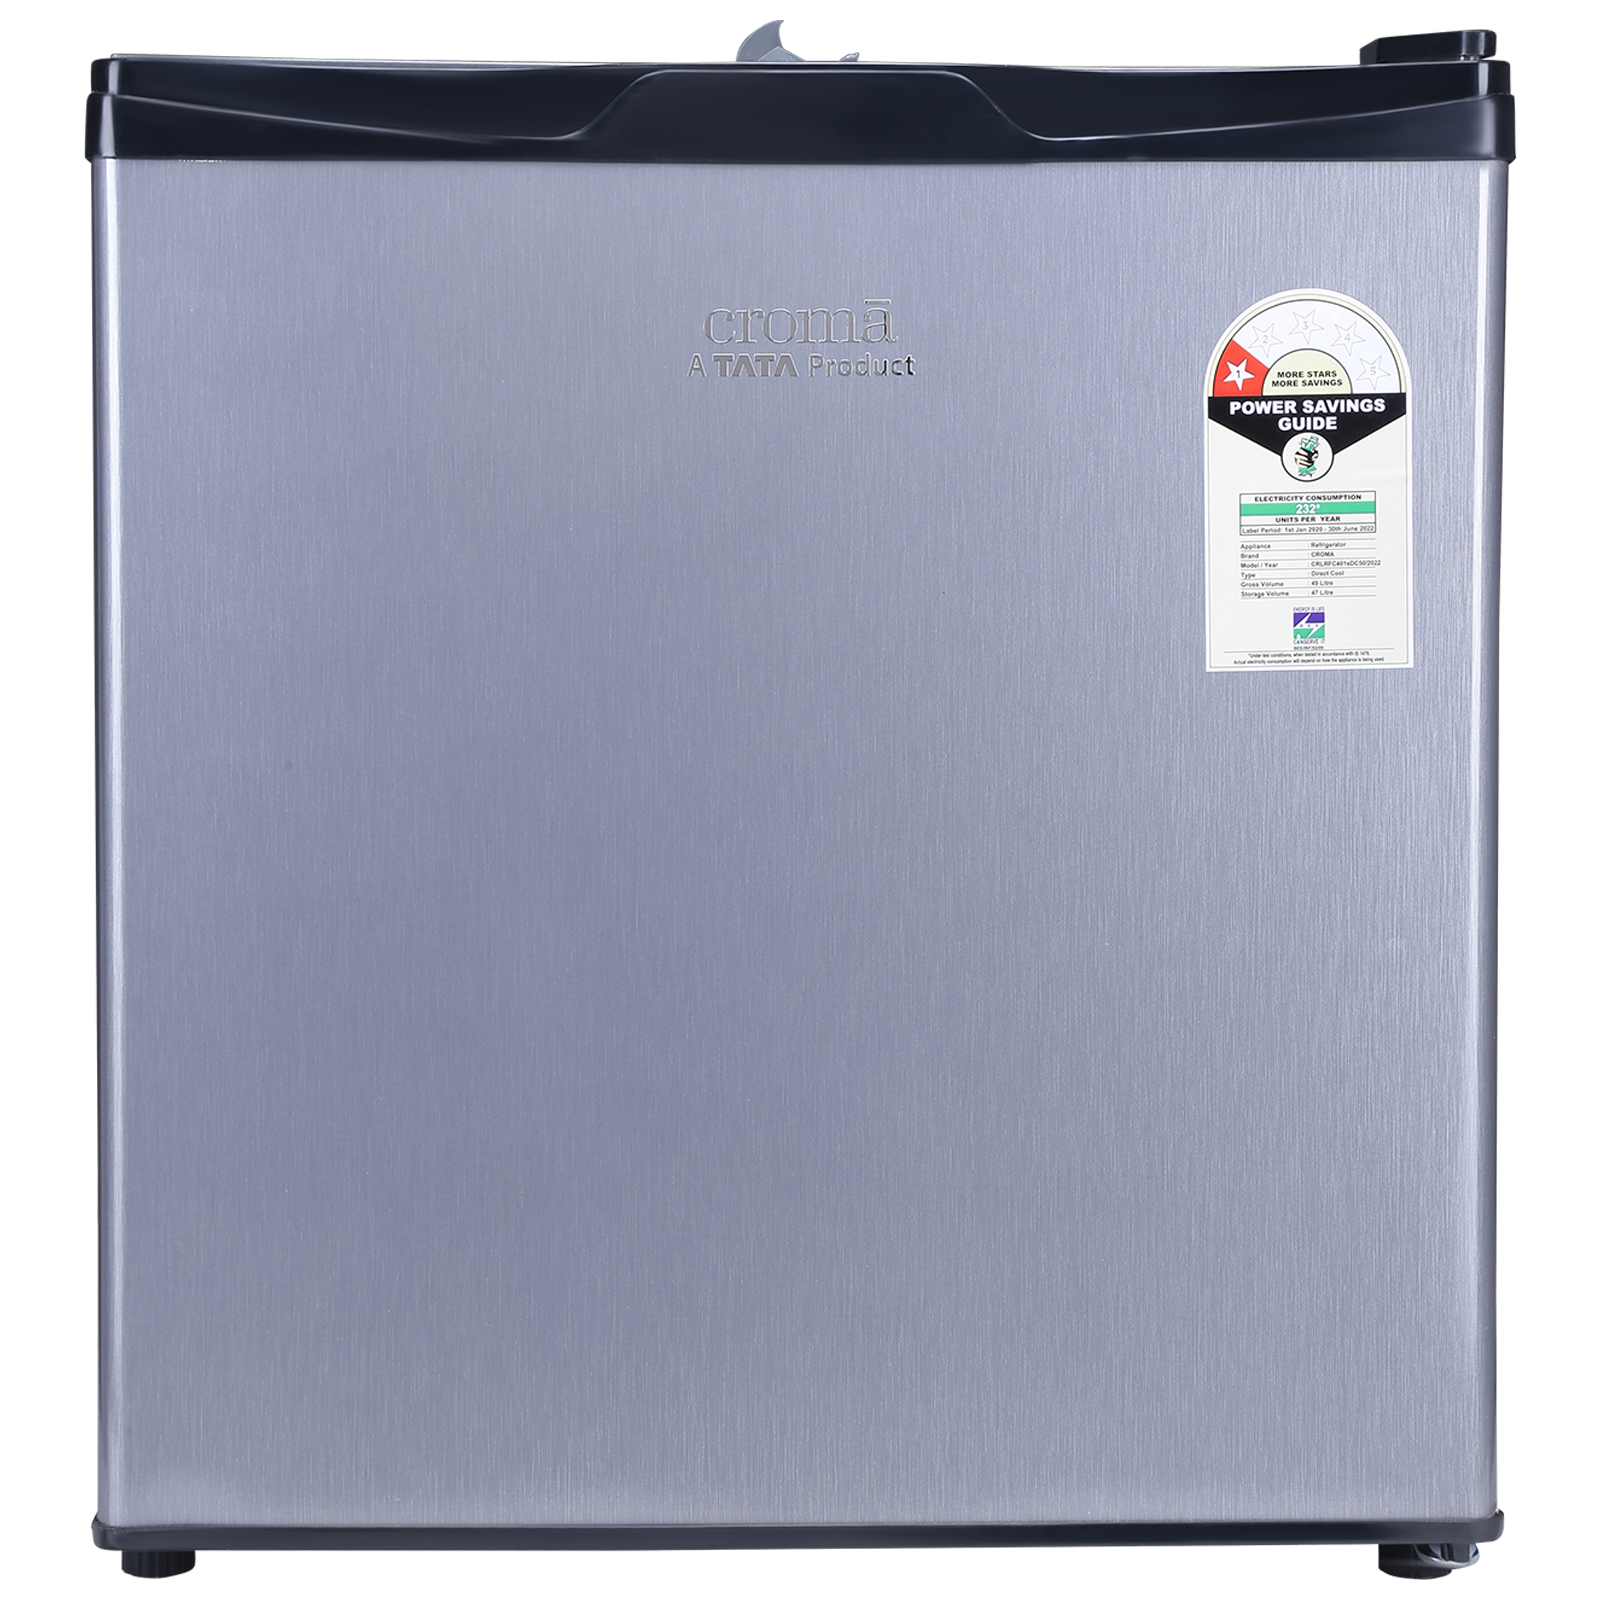 Croma 49 Litres 1 Star Direct Cool Single Door Refrigerator with Stabilizer Free Operation (CRLRFC401sDC50, Hairline Silver)_1